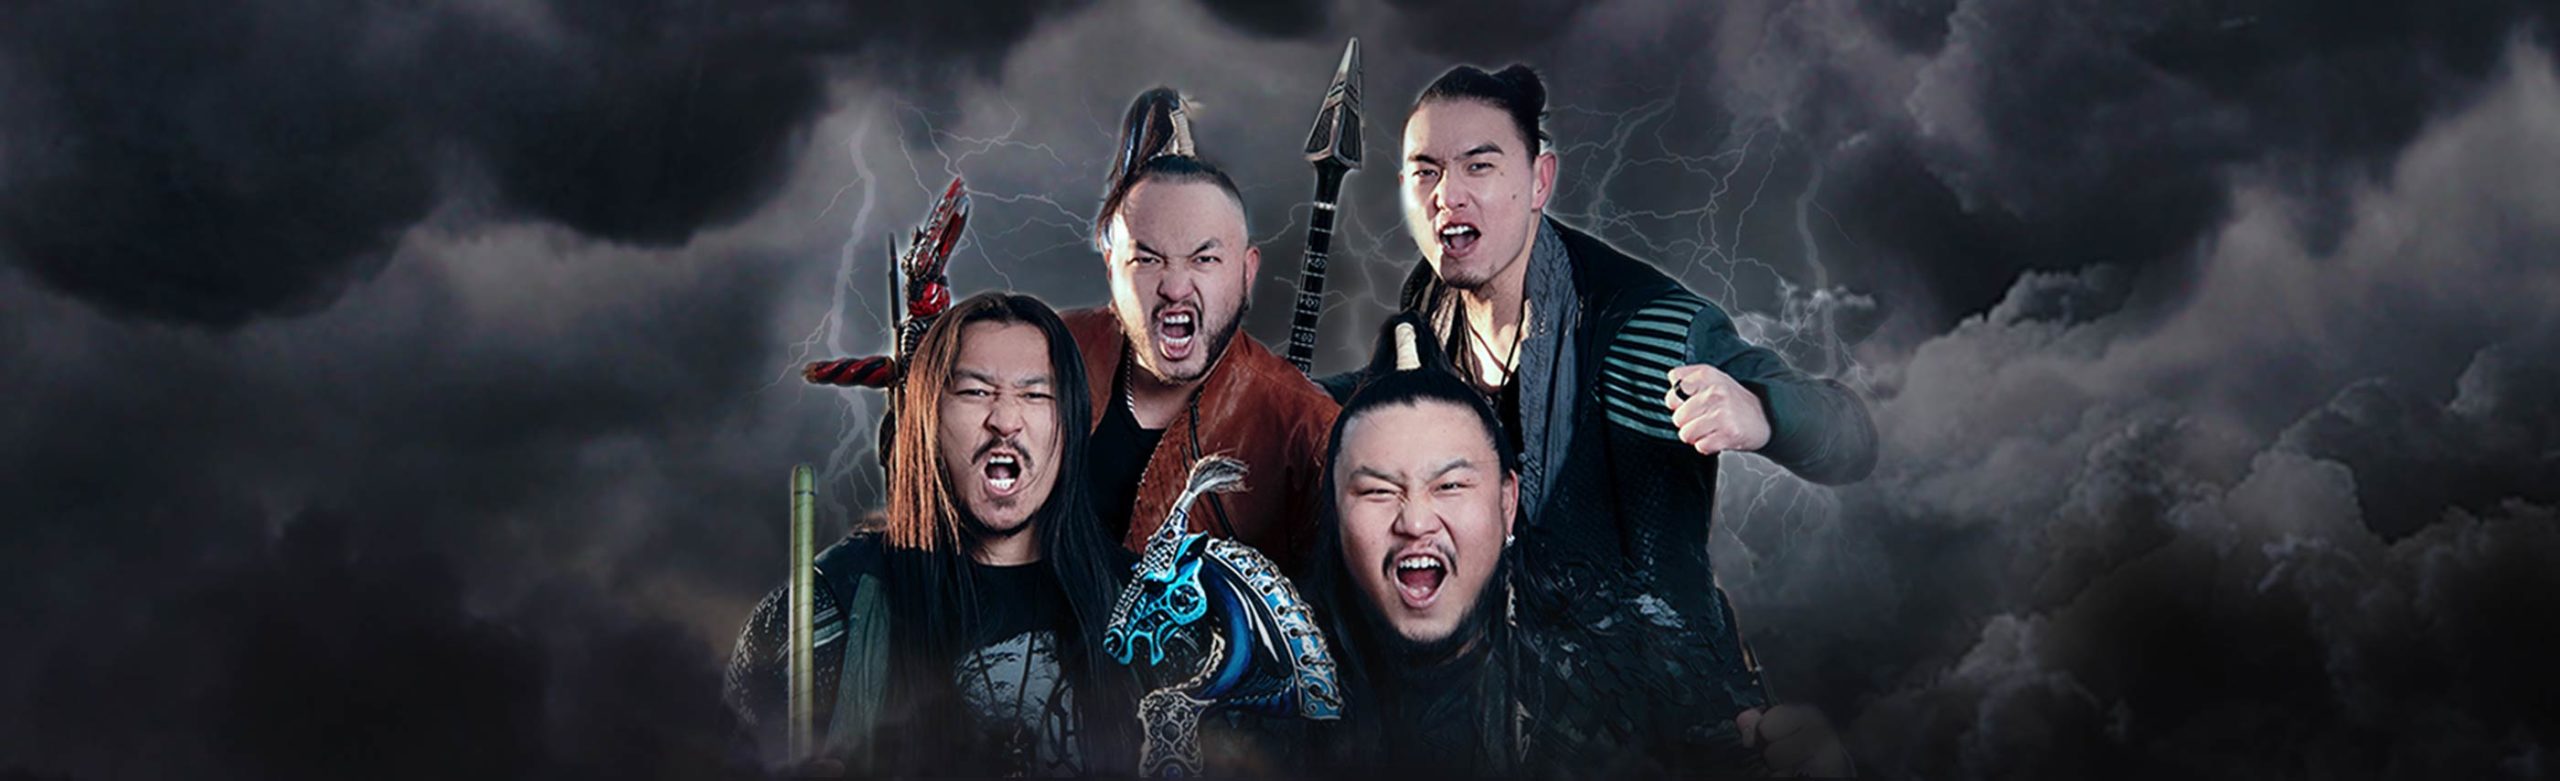 Mongolia’s The HU Announce Black Thunder Tour Dates in Missoula and Bozeman Image